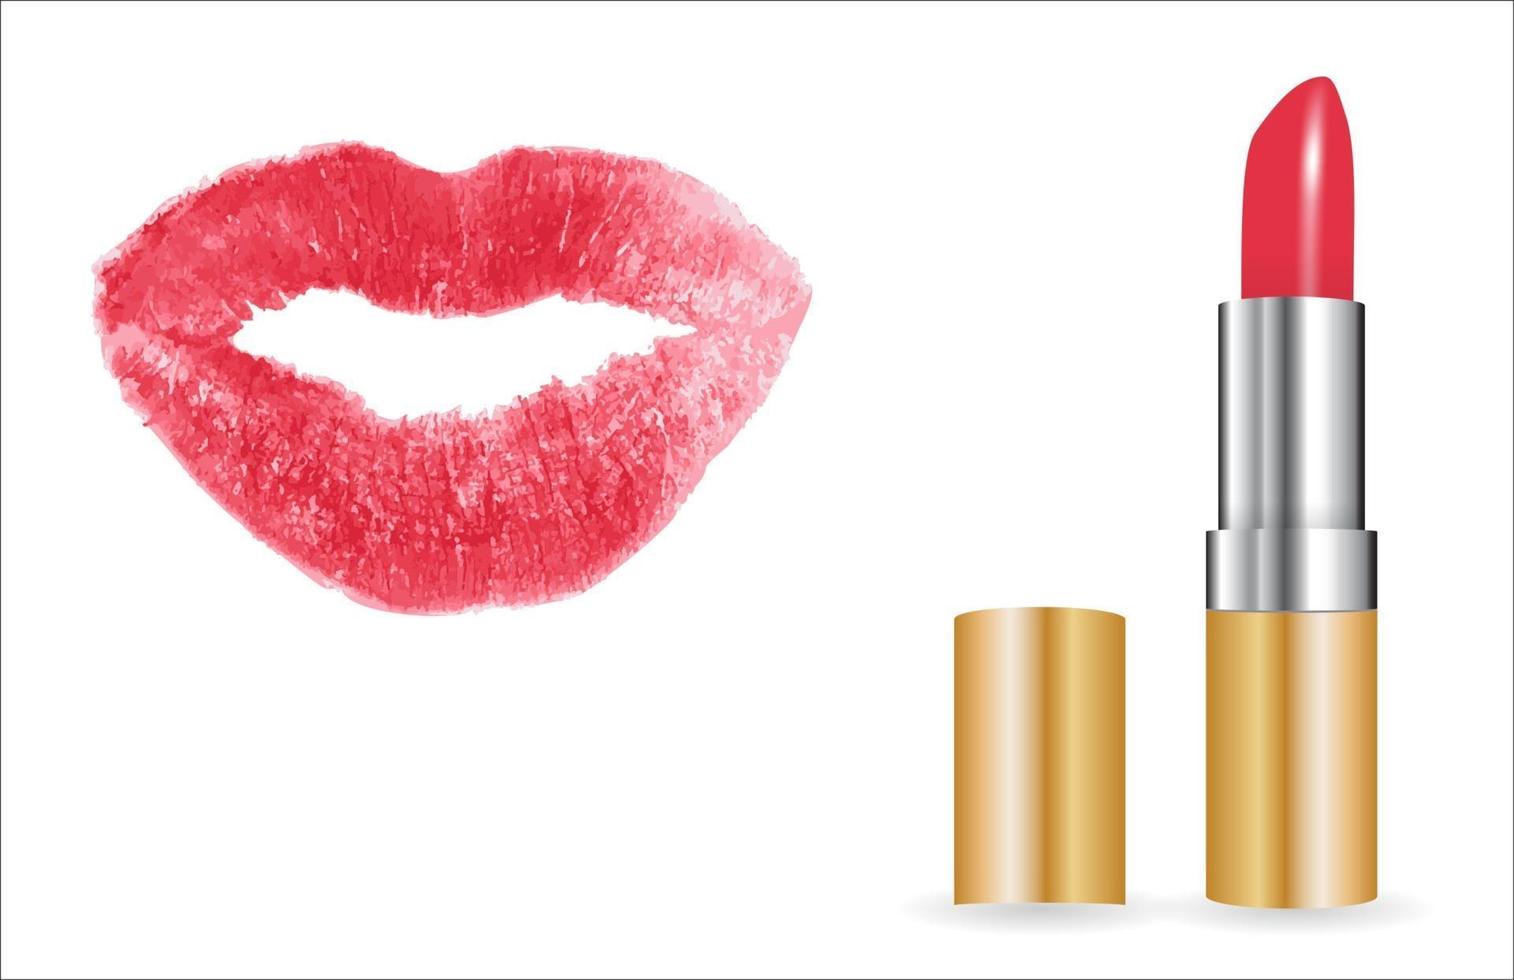 3D Model of realistic red lipstick with lip print. Vector Illustration. EPS10